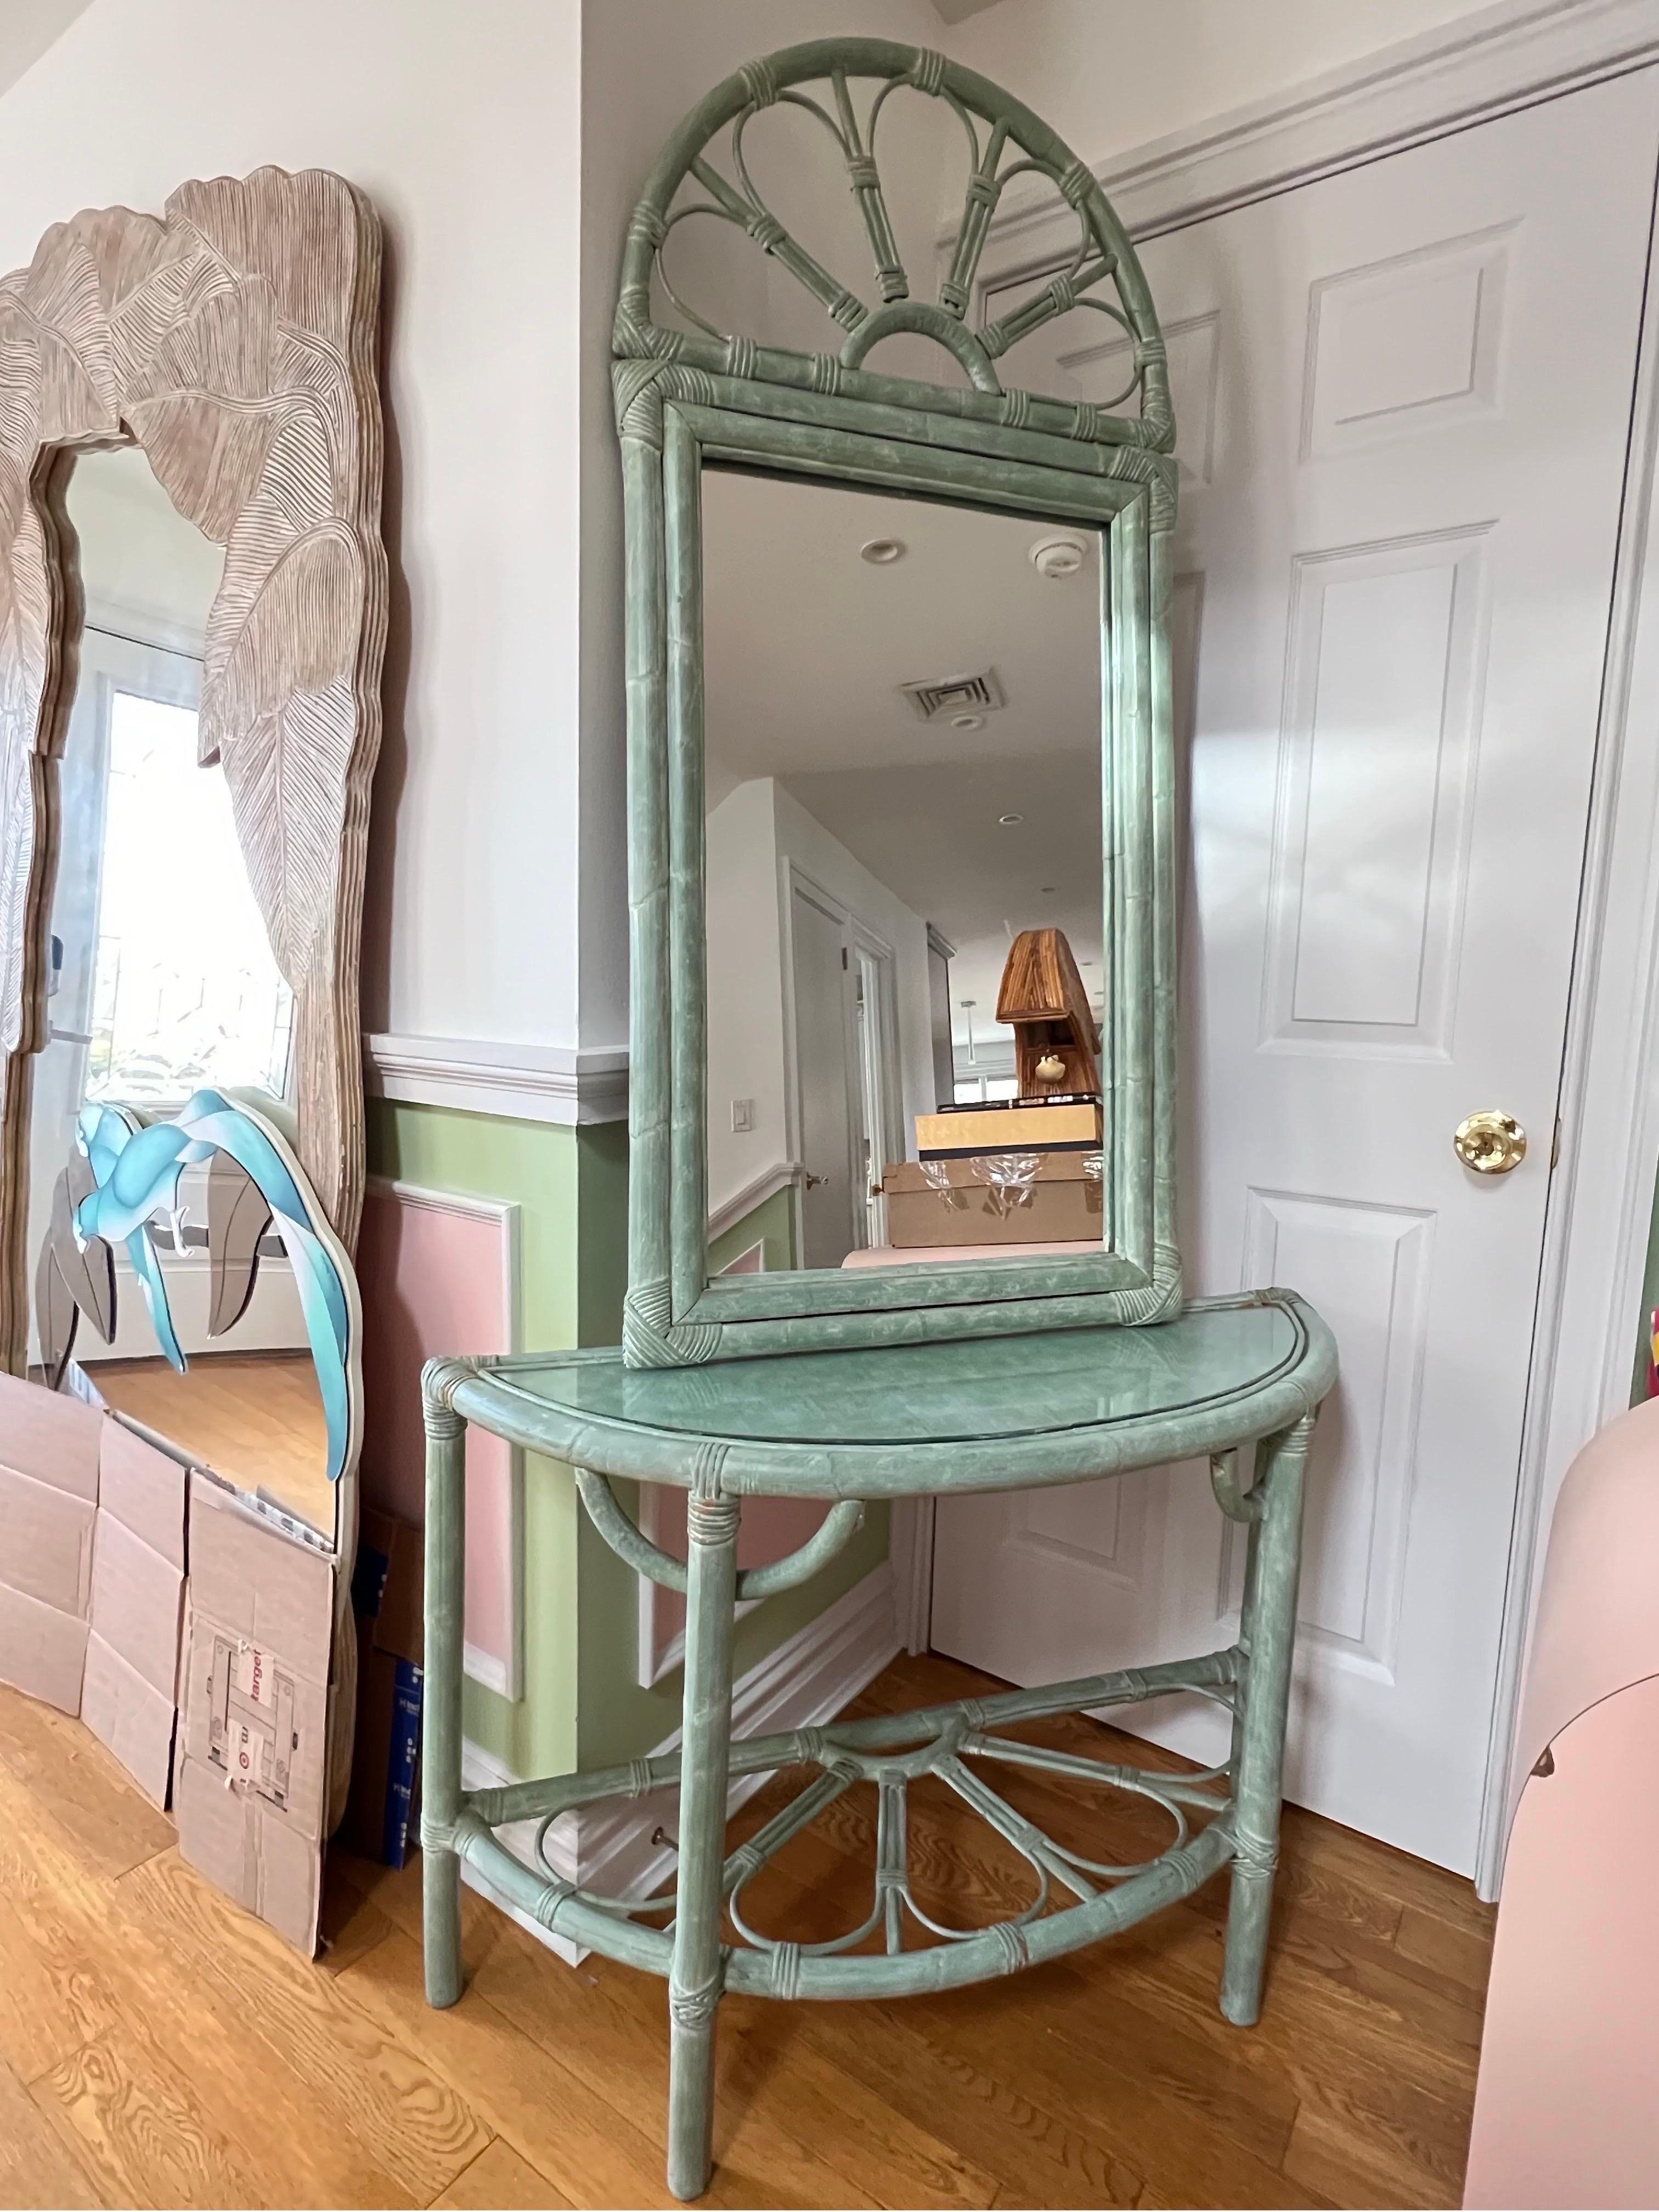 Teal color rattan set of console table and mirror, made in 1980. Perfect for the hallway or entrance.

Mirror dimensions 
Height: 54.5
Width: 26
Depth: 2

Console table dimensions 
Height: 28
Width: 42
Depth: 14.5